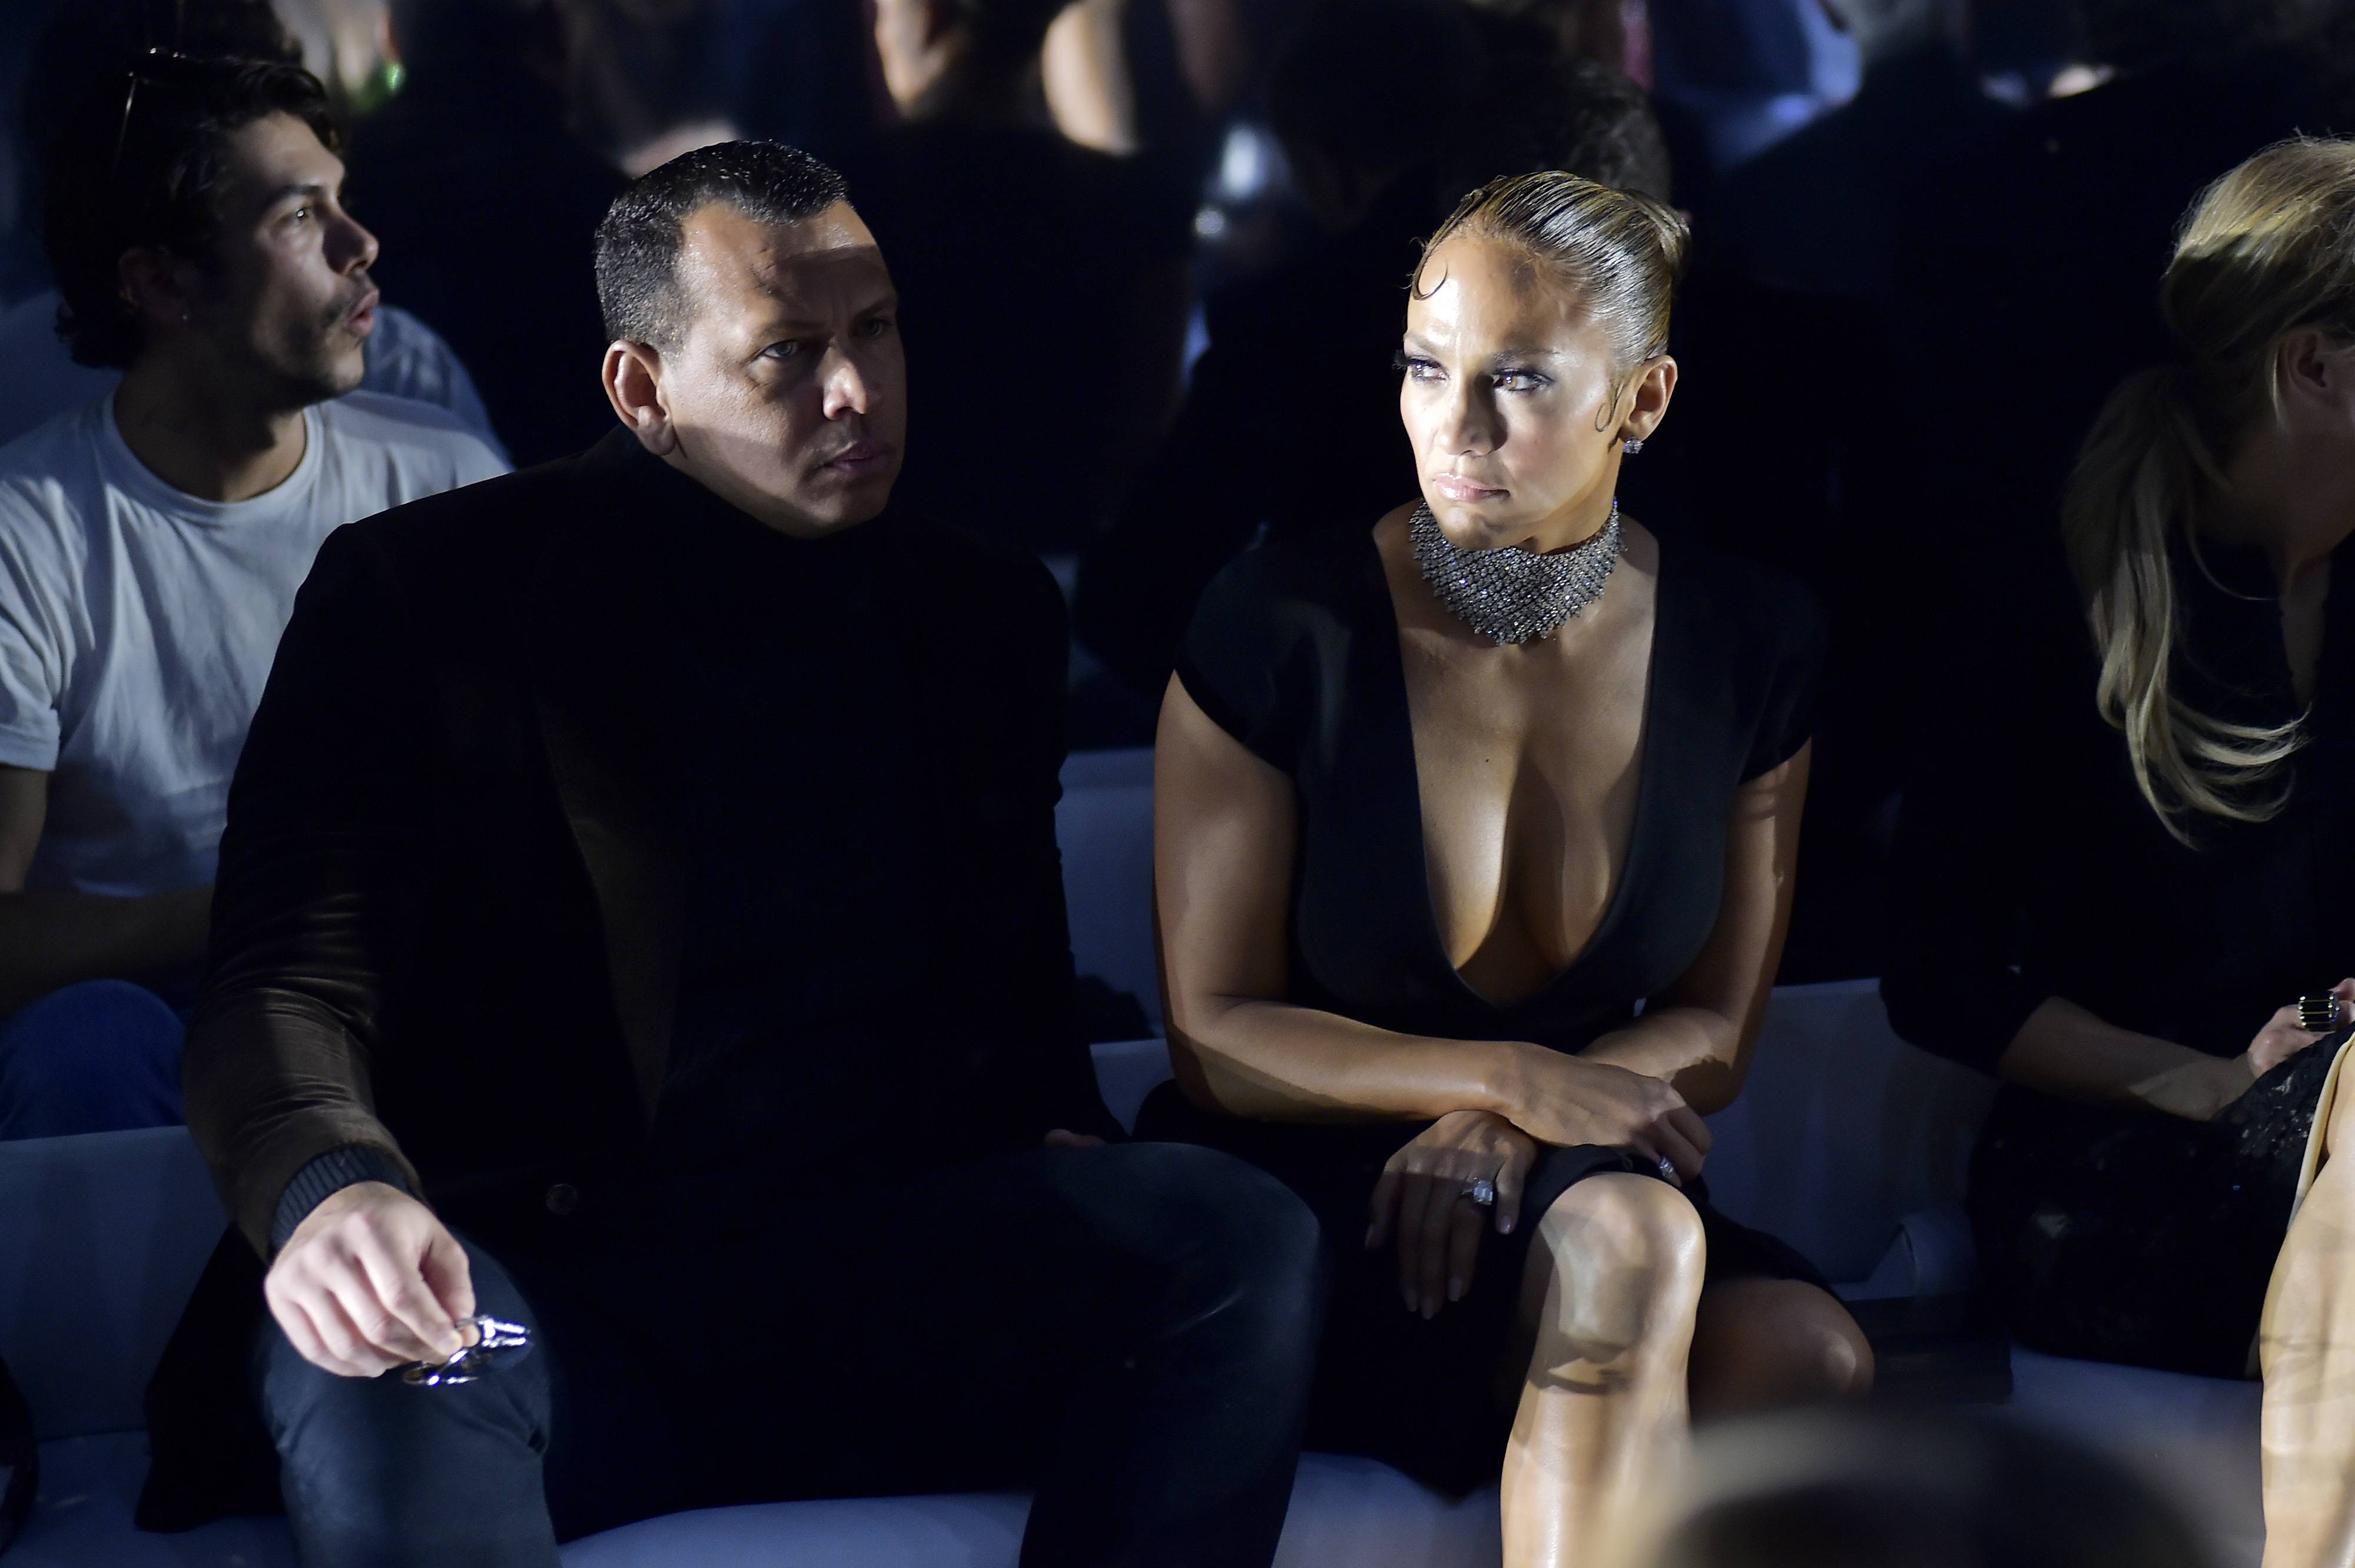 LOS ANGELES, CALIFORNIA - FEBRUARY 07: Alex Rodriguez and  Jennifer Lopez attend Tom Ford: Autumn/Winter 2020 Runway Show at Milk Studios on February 07, 2020 in Los Angeles, California. (Photo by Stefanie Keenan/Getty Images for TOM FORD: AUTUMN/WINTER 2020 RUNWAY SHOW )